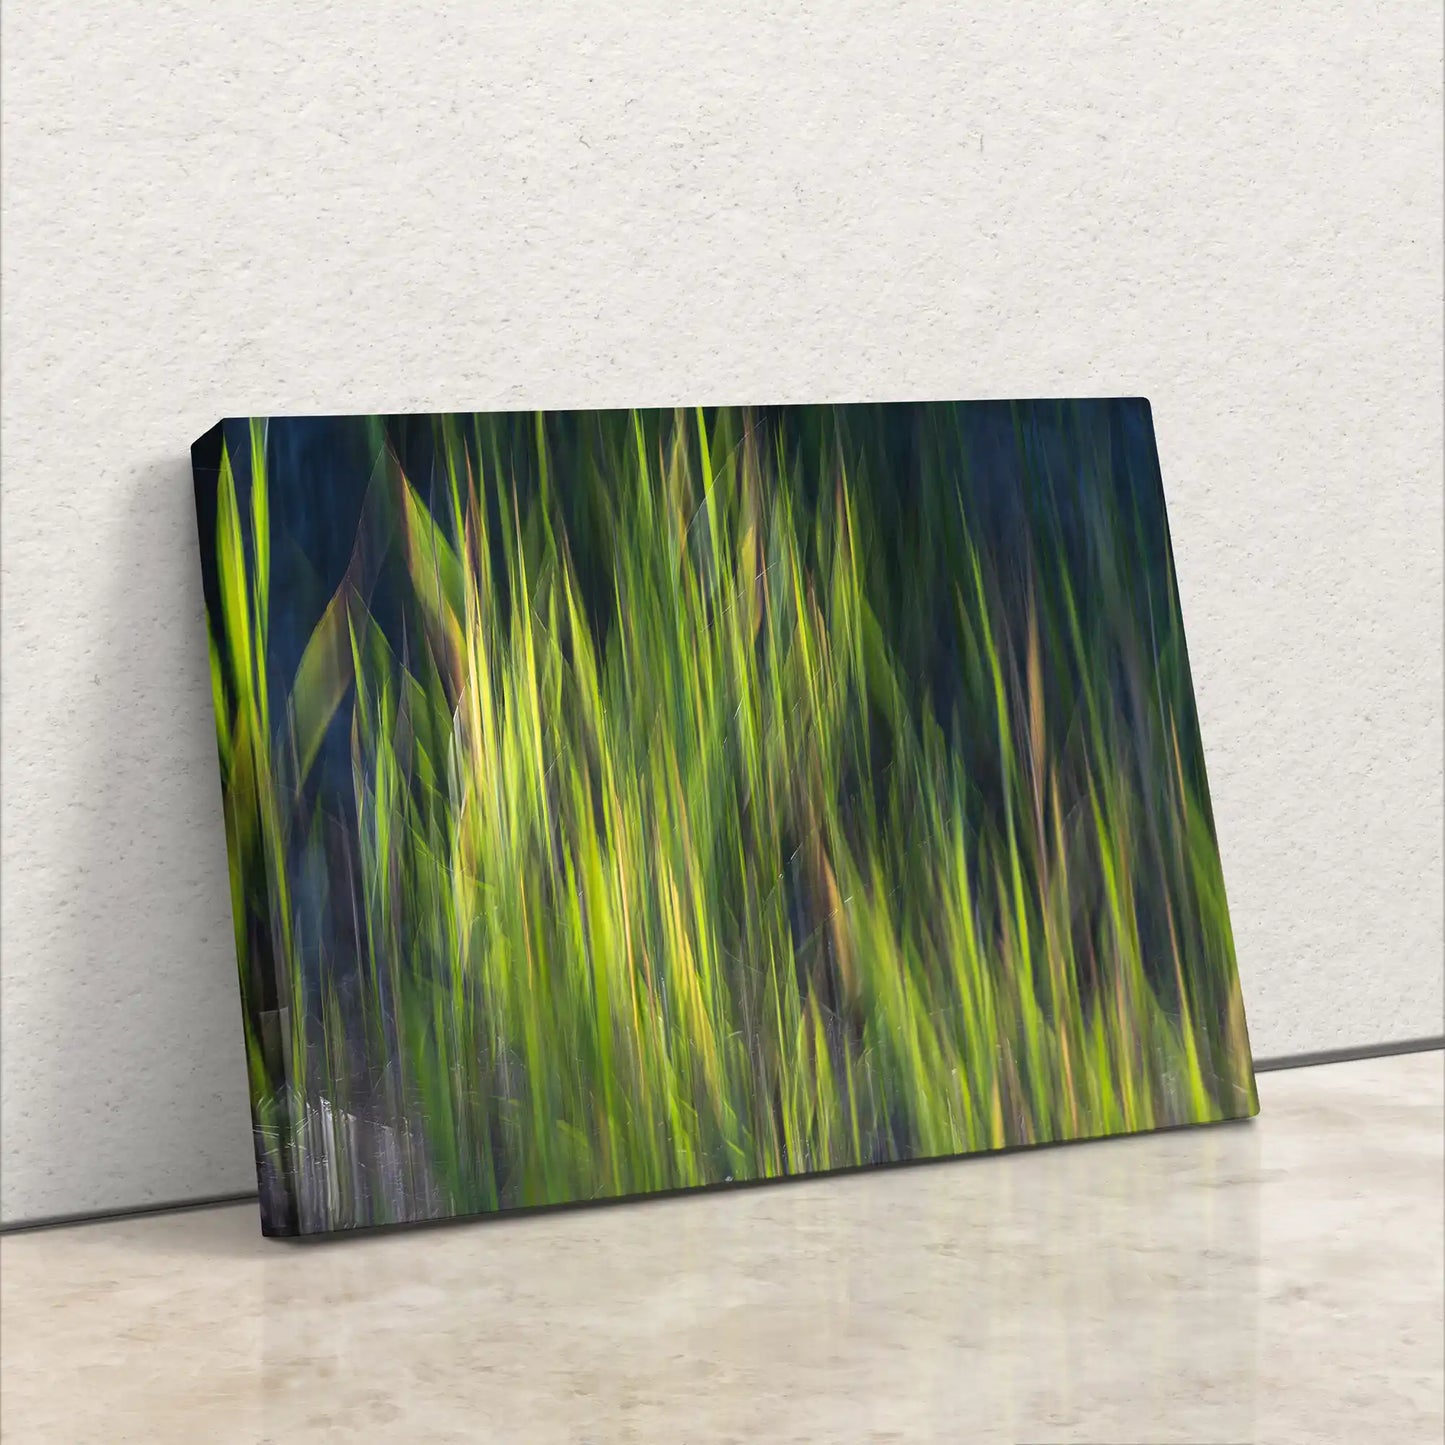 A canvas print leaning against a white wall, featuring abstract green and yellow vertical brushstrokes giving an impression of blurred grass or foliage.